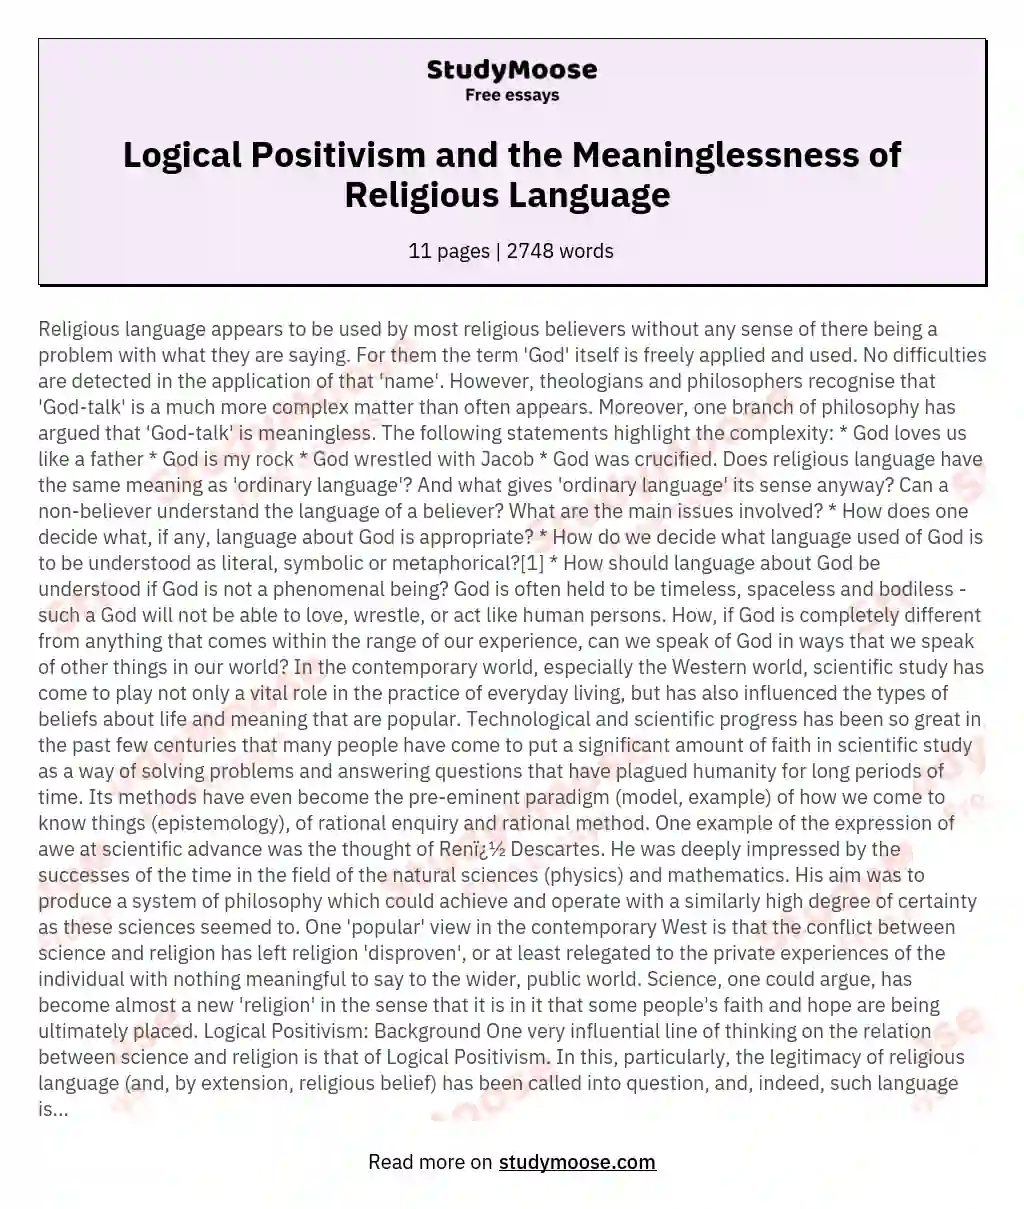 Logical Positivism and the Meaninglessness of Religious Language  essay